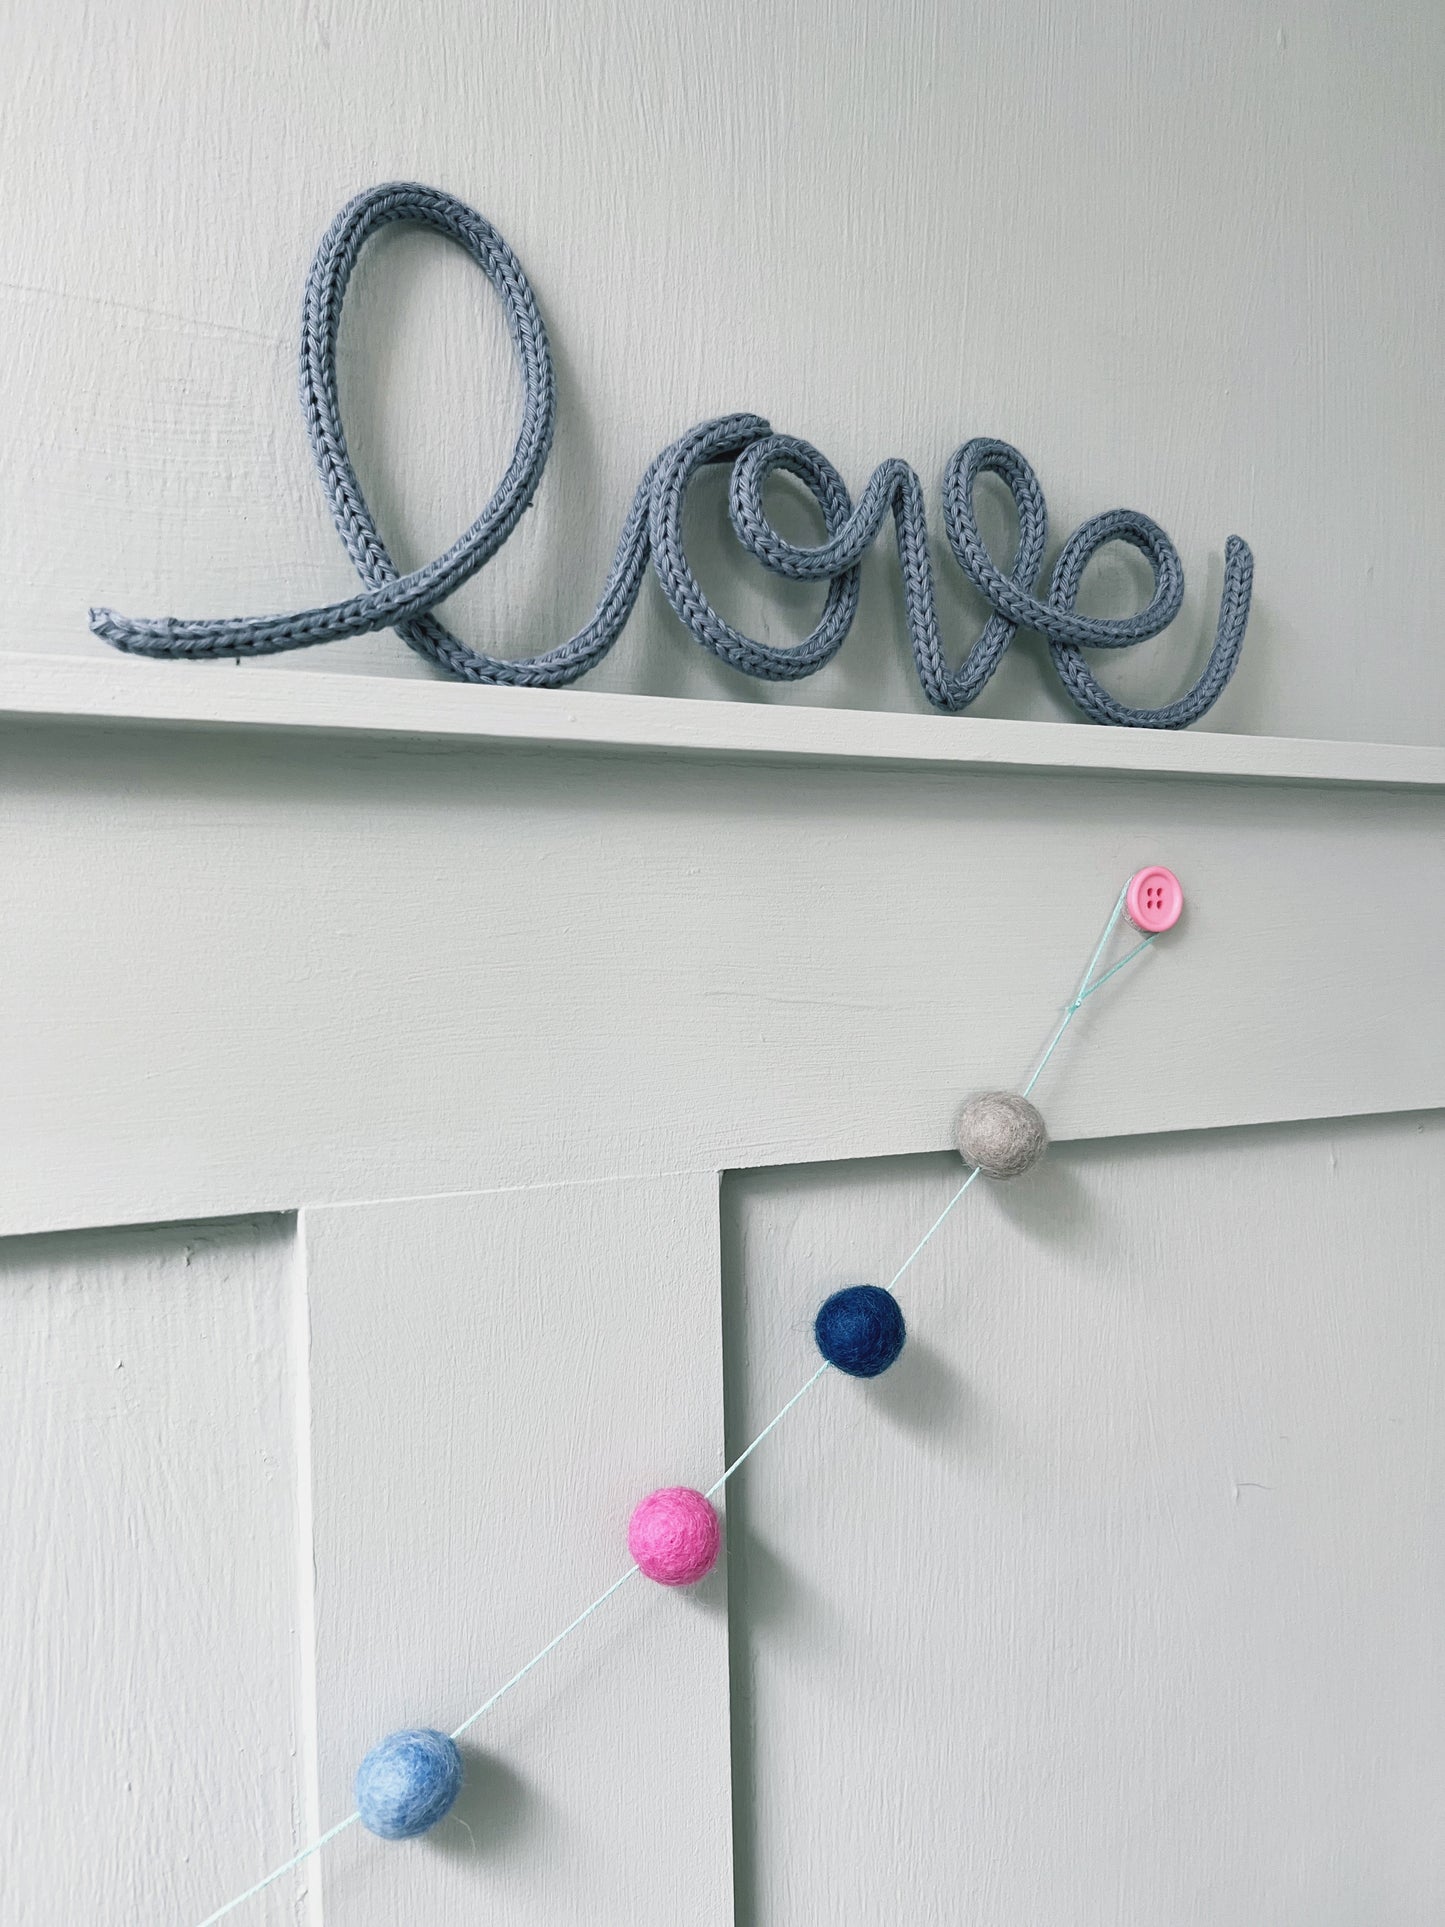 LOVELY BUTTON UPS ®  Button Wall Hooks - Pastel Collection #01